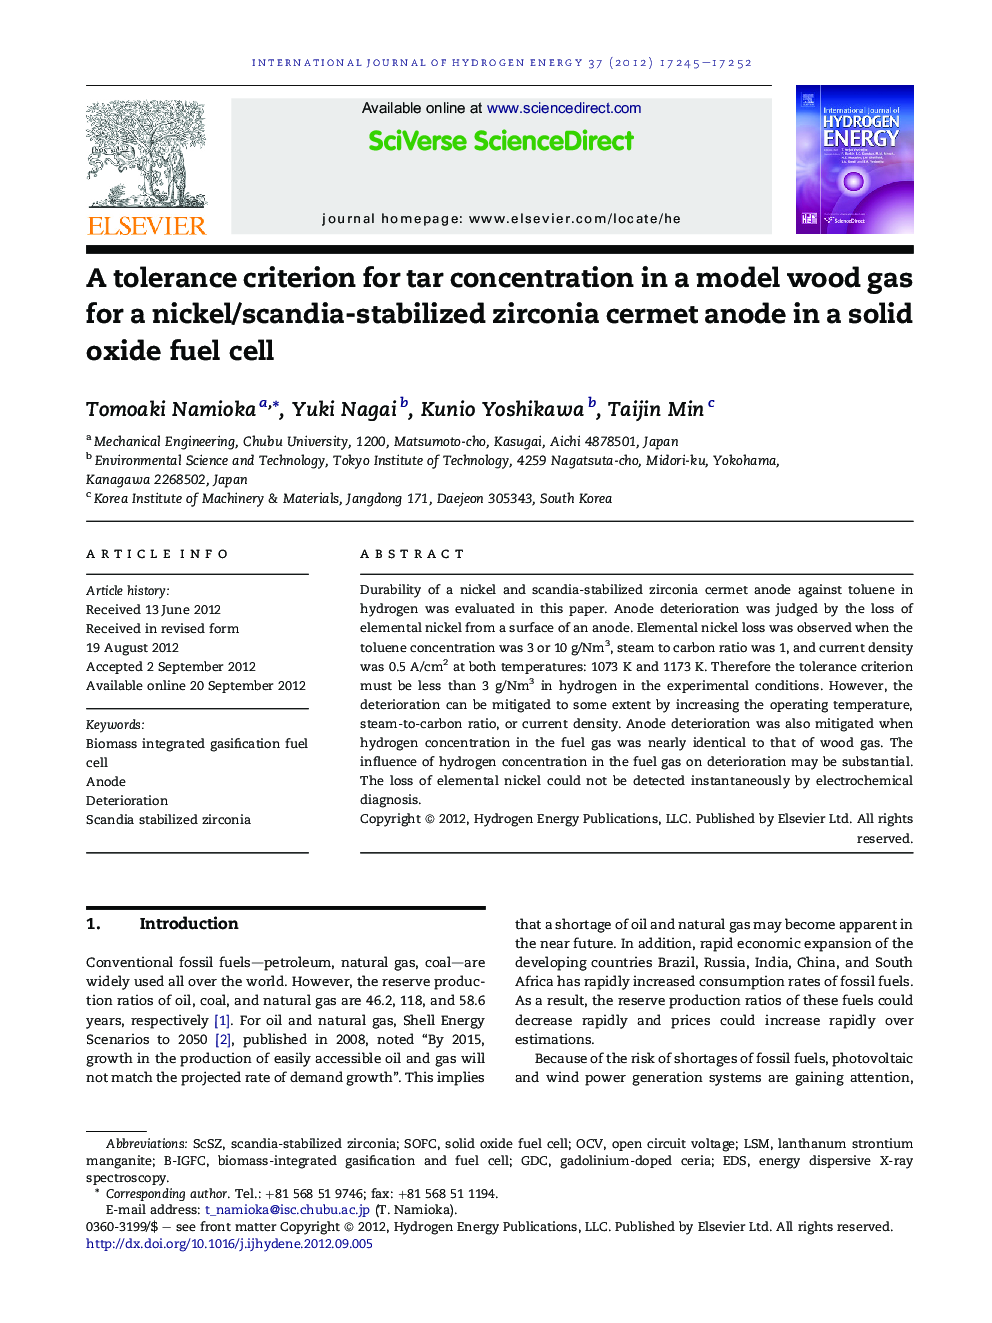 A tolerance criterion for tar concentration in a model wood gas for a nickel/scandia-stabilized zirconia cermet anode in a solid oxide fuel cell